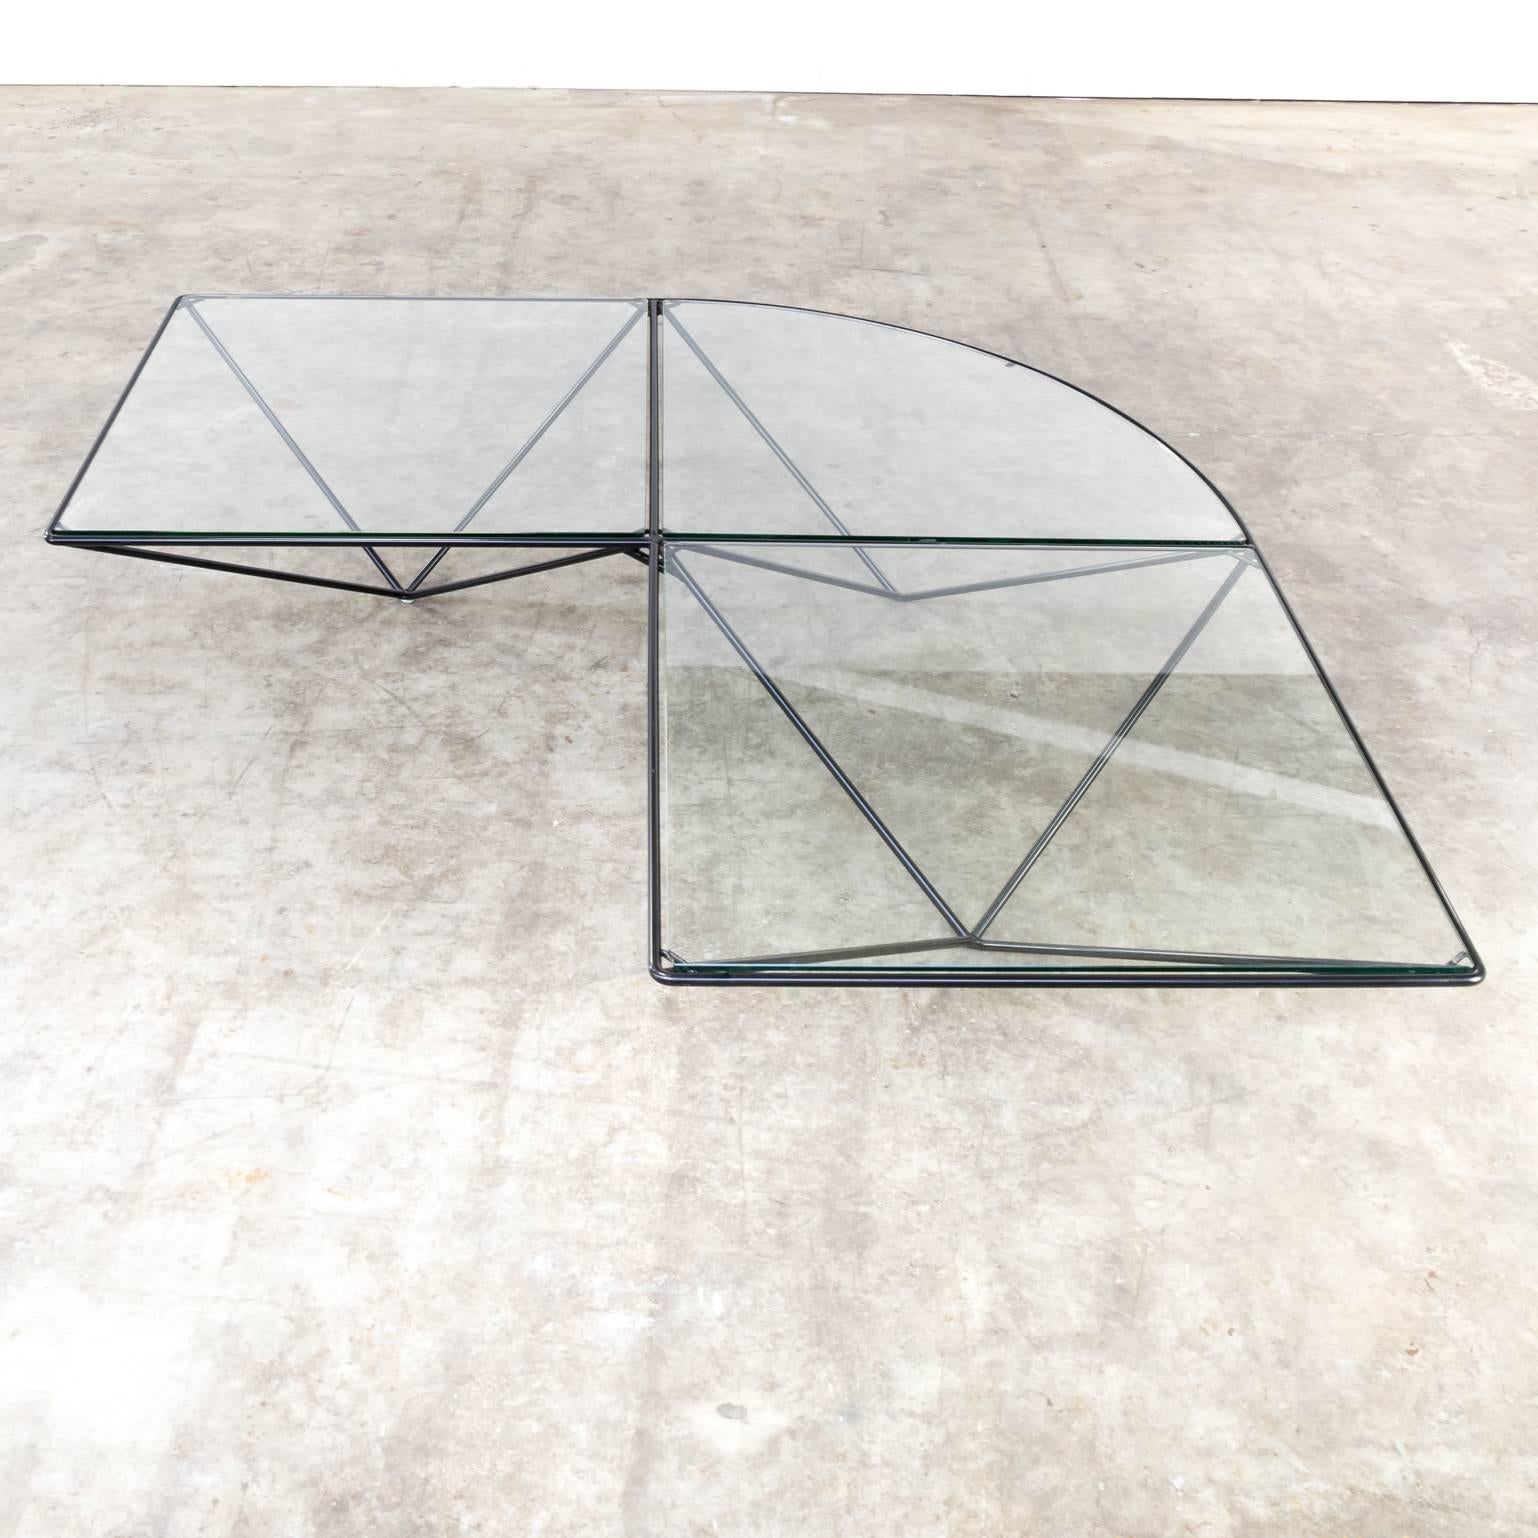 20th Century Glass Corner Coffee Table, style of Paolo Piva For Sale